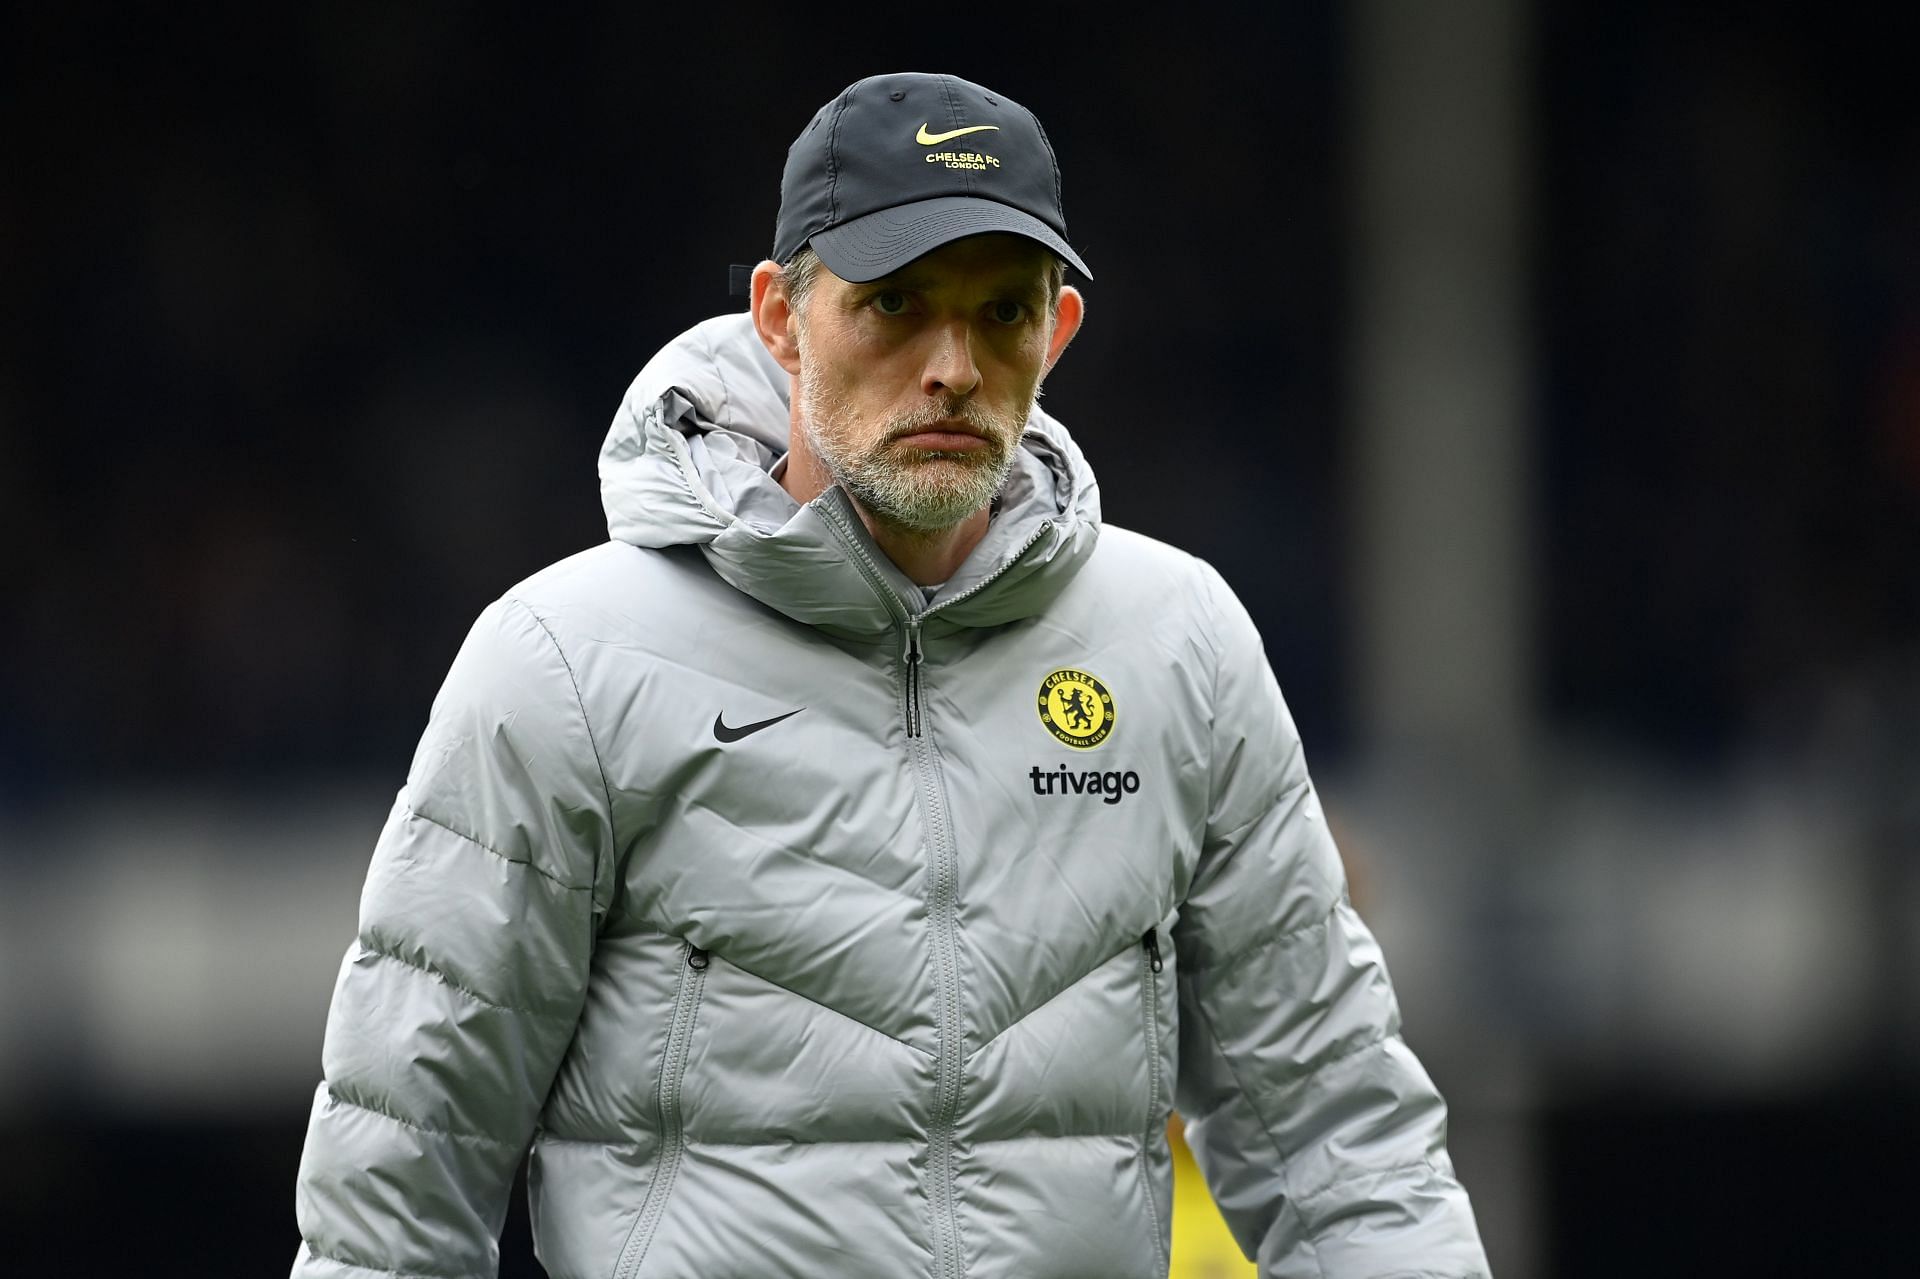 Chelsea Transfer News Roundup: Blues agree £45 million fee to sign Manchester City forward; club preparing €70 million offer for Juventus defender, and more - July 3, 2022